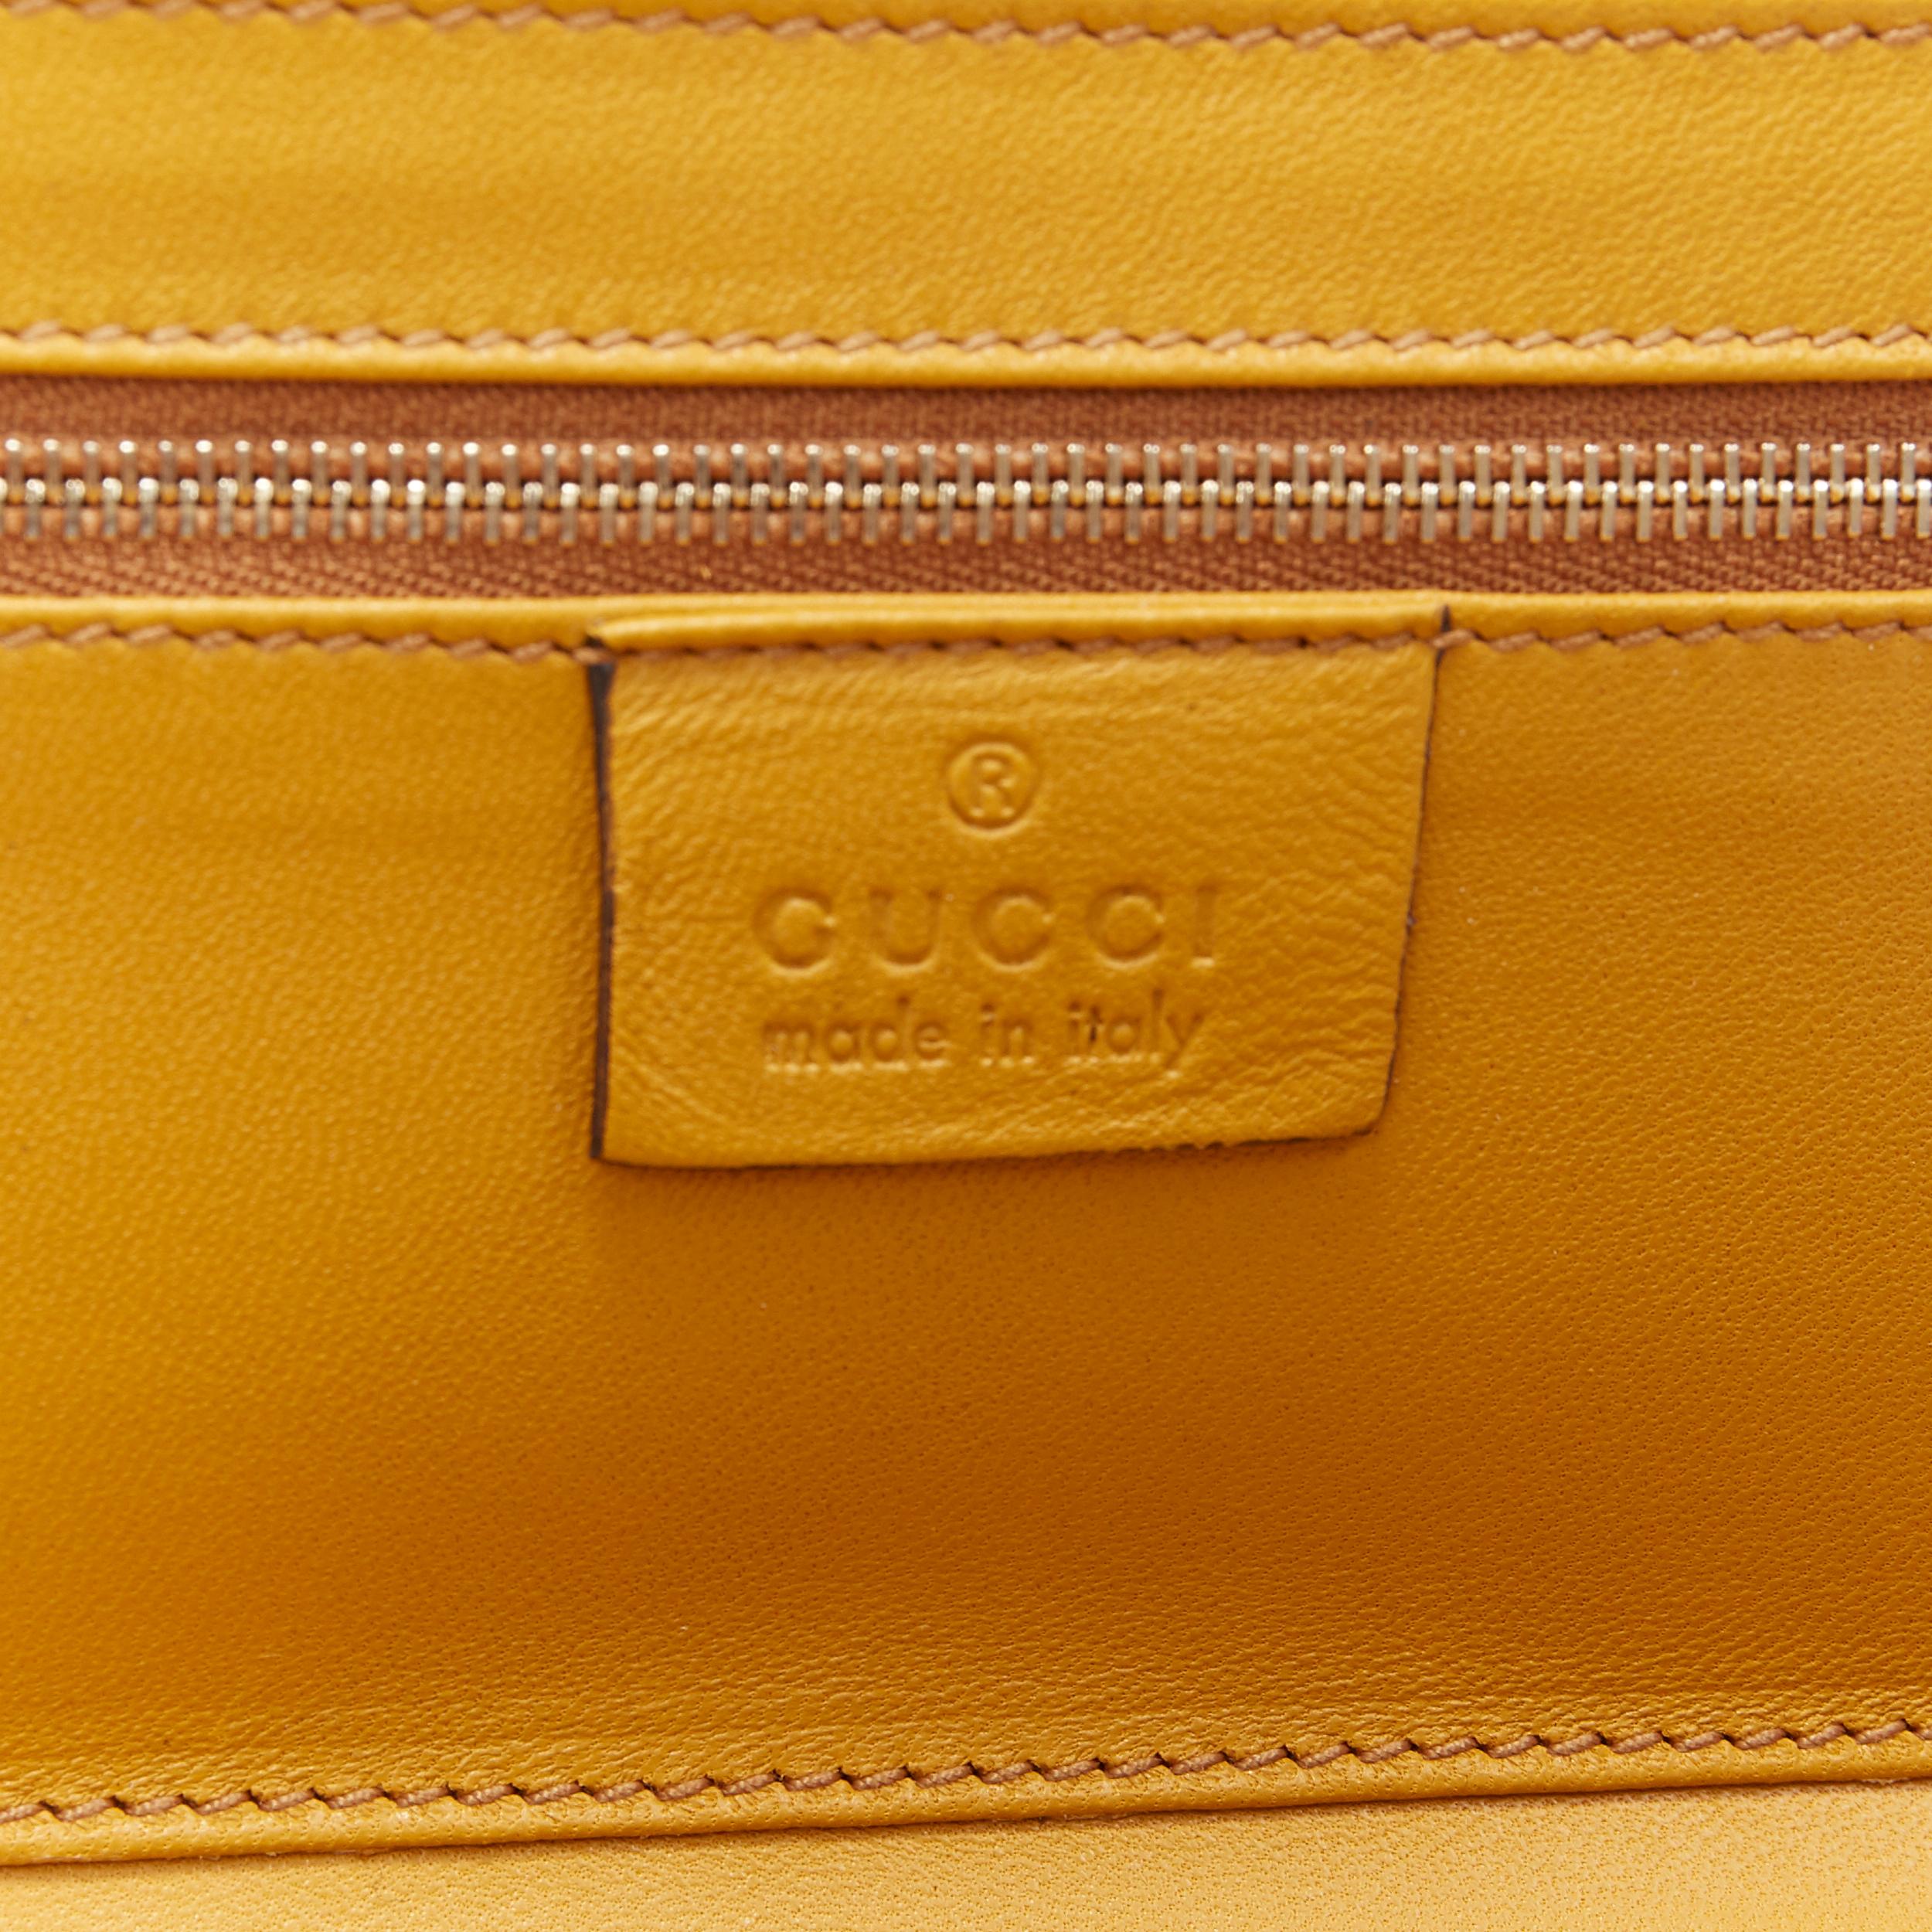 Women's GUCCI marigold yellow suede crystal embellished leather trimmed box clutch bag